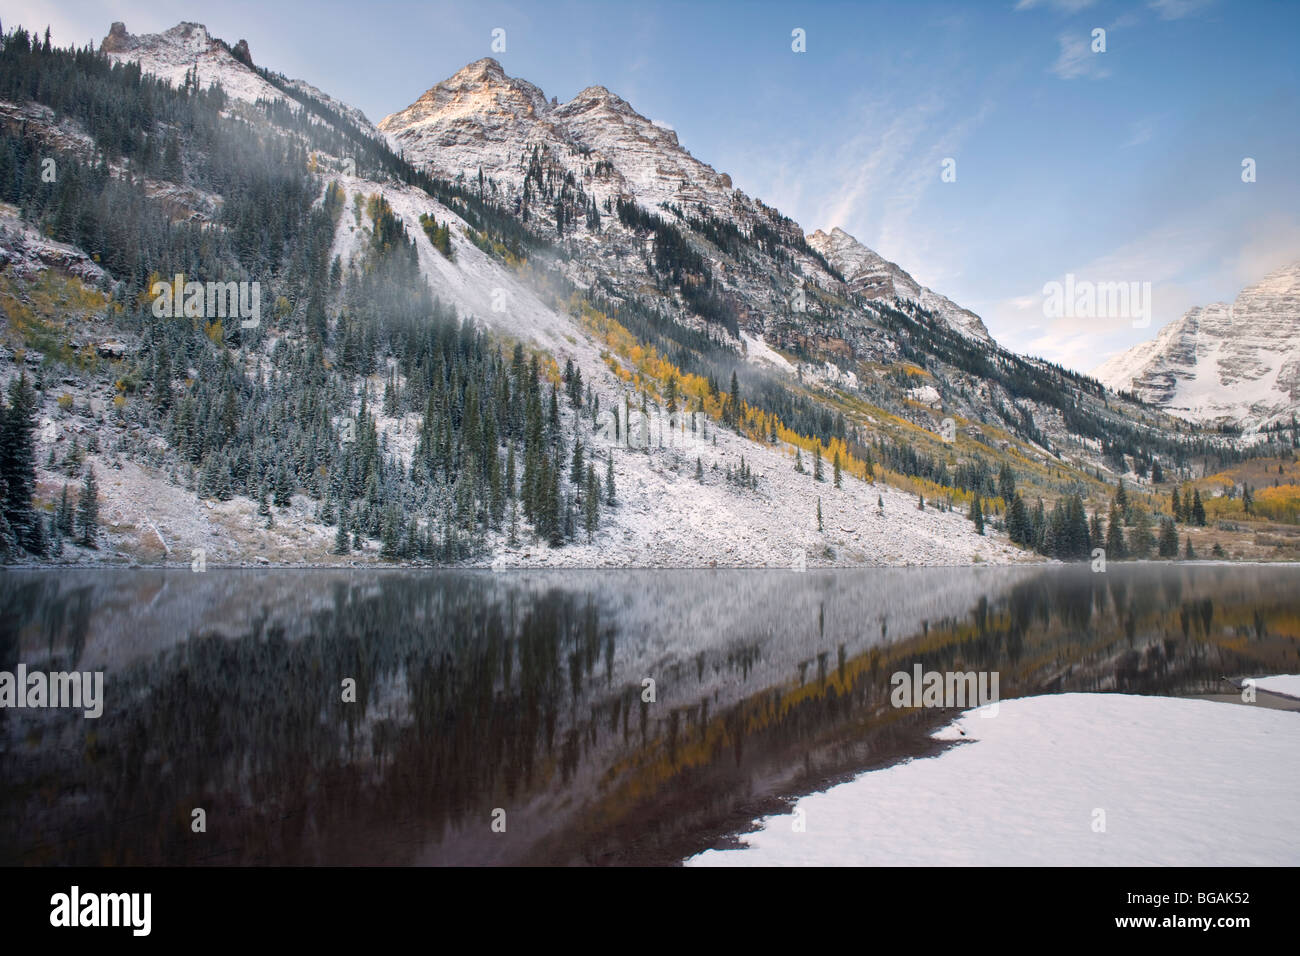 Mountains covered in snow and surrounding the Maroon Lake (CO) with ice formation in the foreground. Clear morning sky Stock Photo